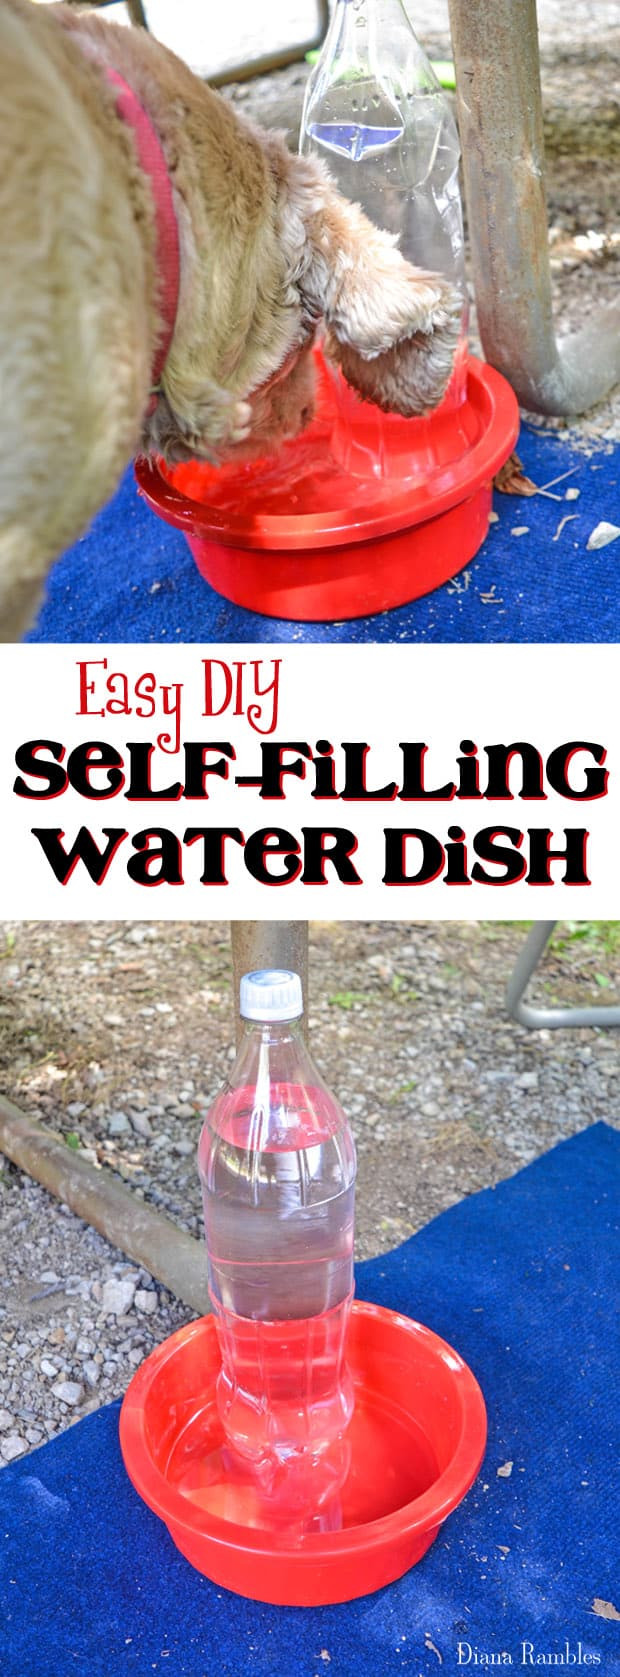 DIY Dog Water Dispenser
 Tips for Keeping Your Dog Cool While Camping in Summer